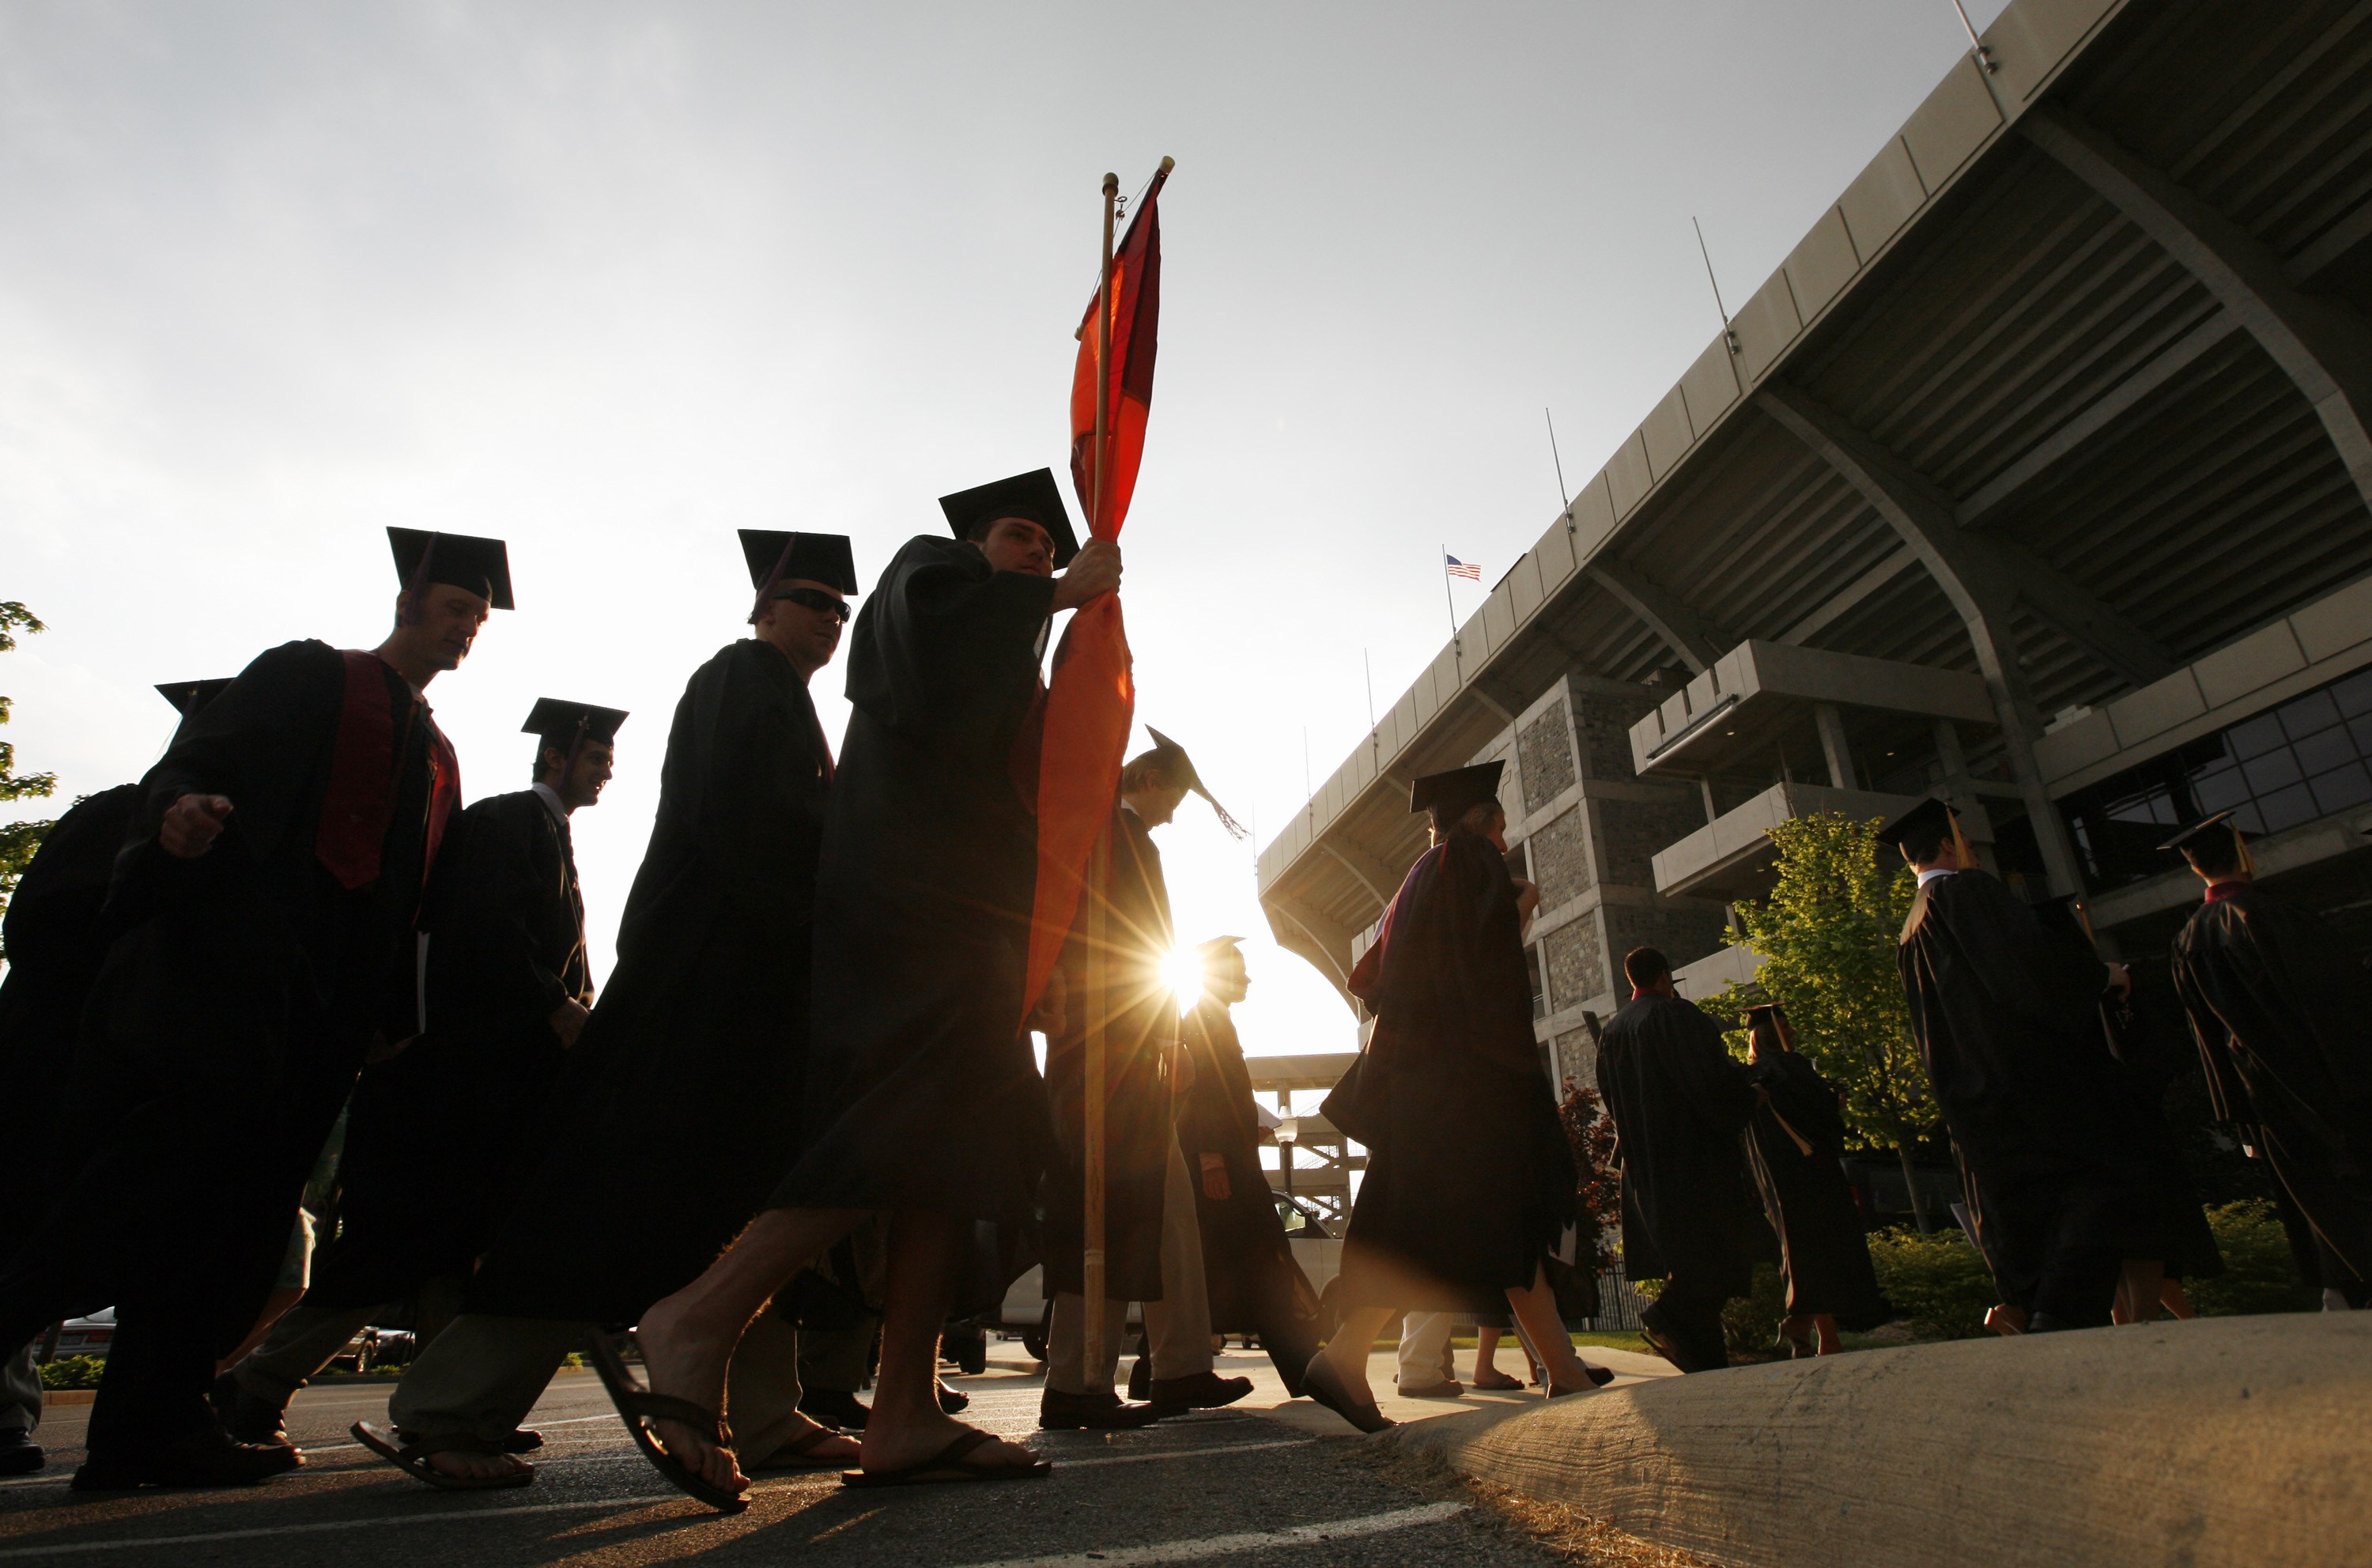 Undergraduate students march into Lane Stadium for Commencement Ceremonies on the campus of Virginia Tech in Blacksburg, Va., Friday, May 11, 2007. (AP Photo/Don Petersen)